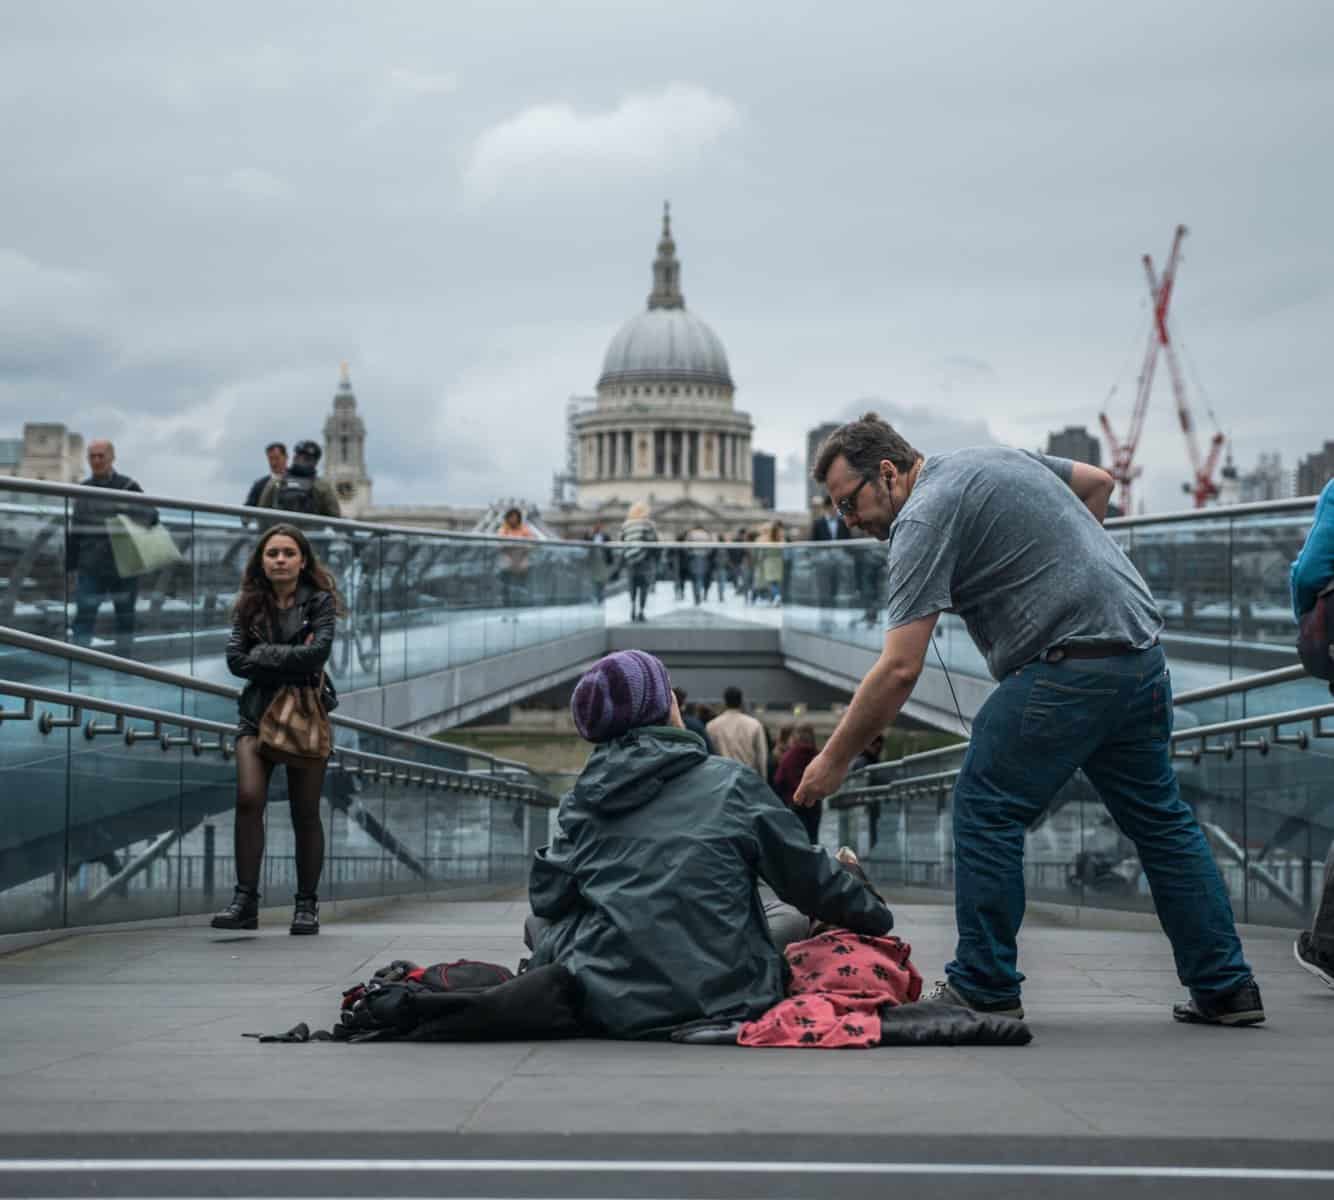 Man giving change to beggar with backdrop of St Paul's Cathedral in London